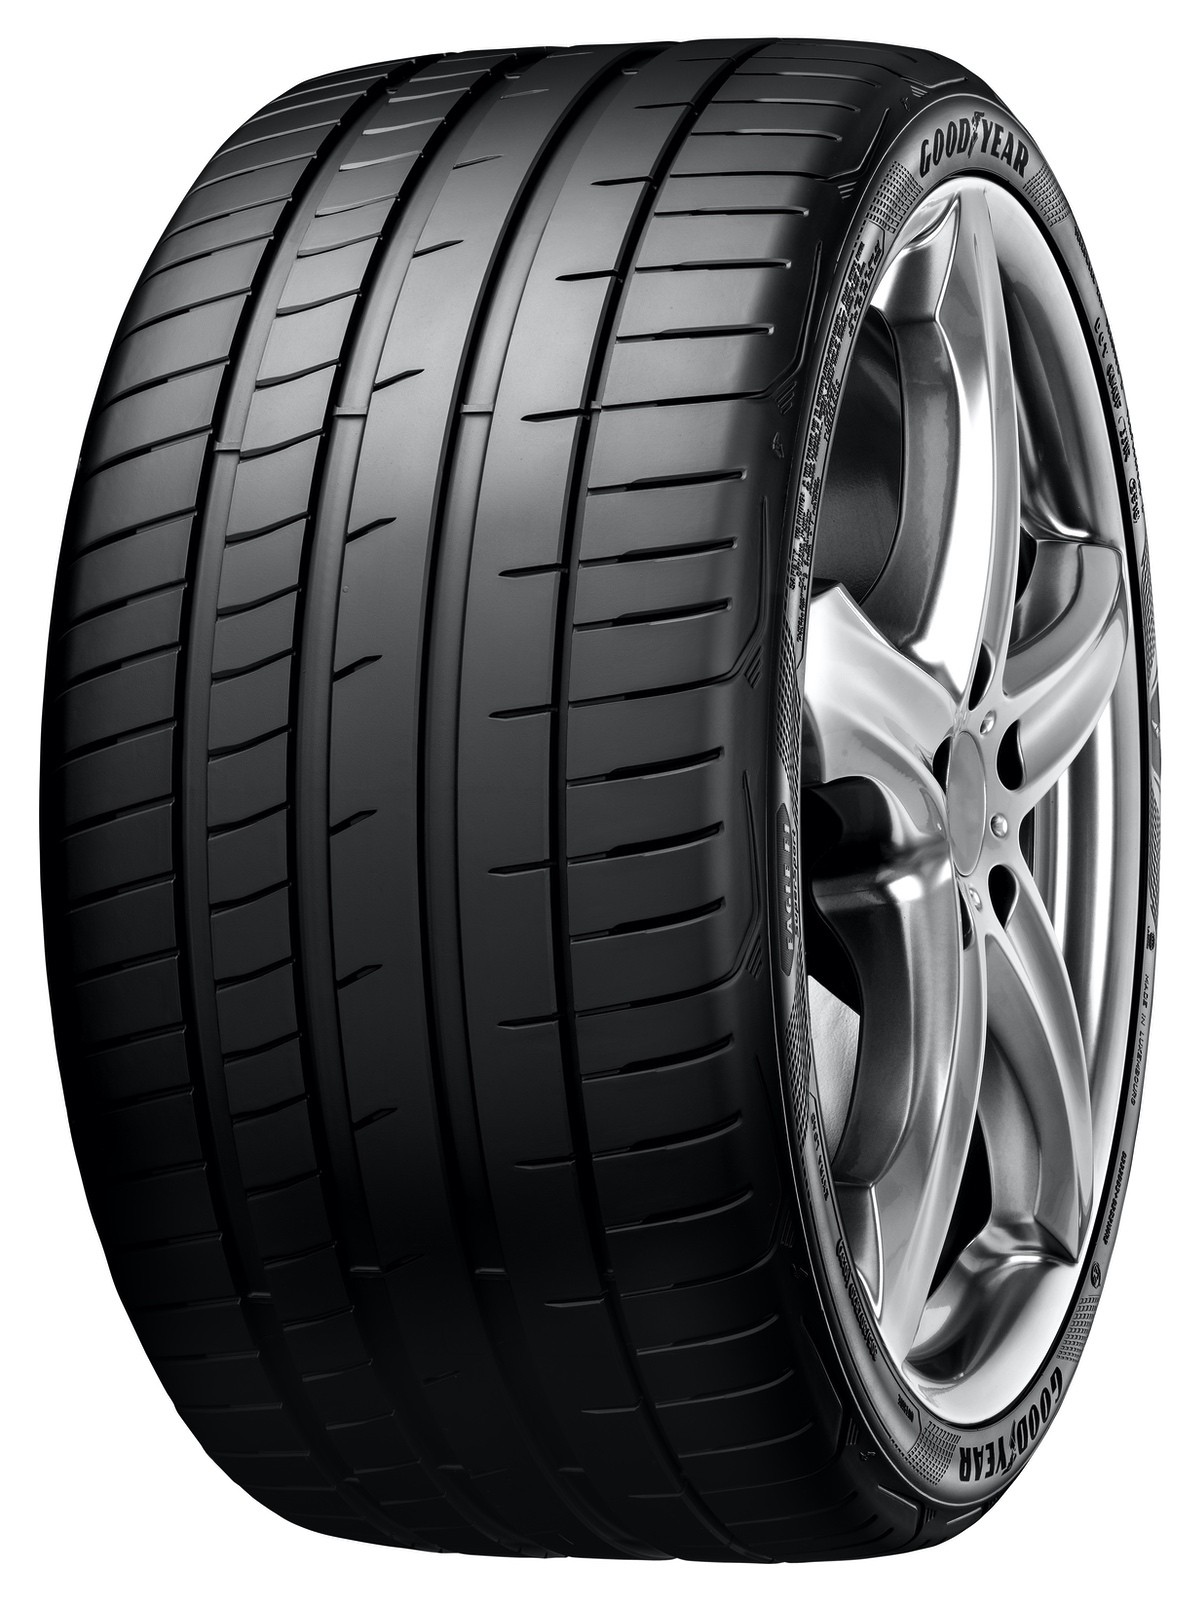 Gomme Nuove Goodyear 245/35 R19 93Y Eagle F1 SuperSport FP XL pneumatici nuovi Estivo